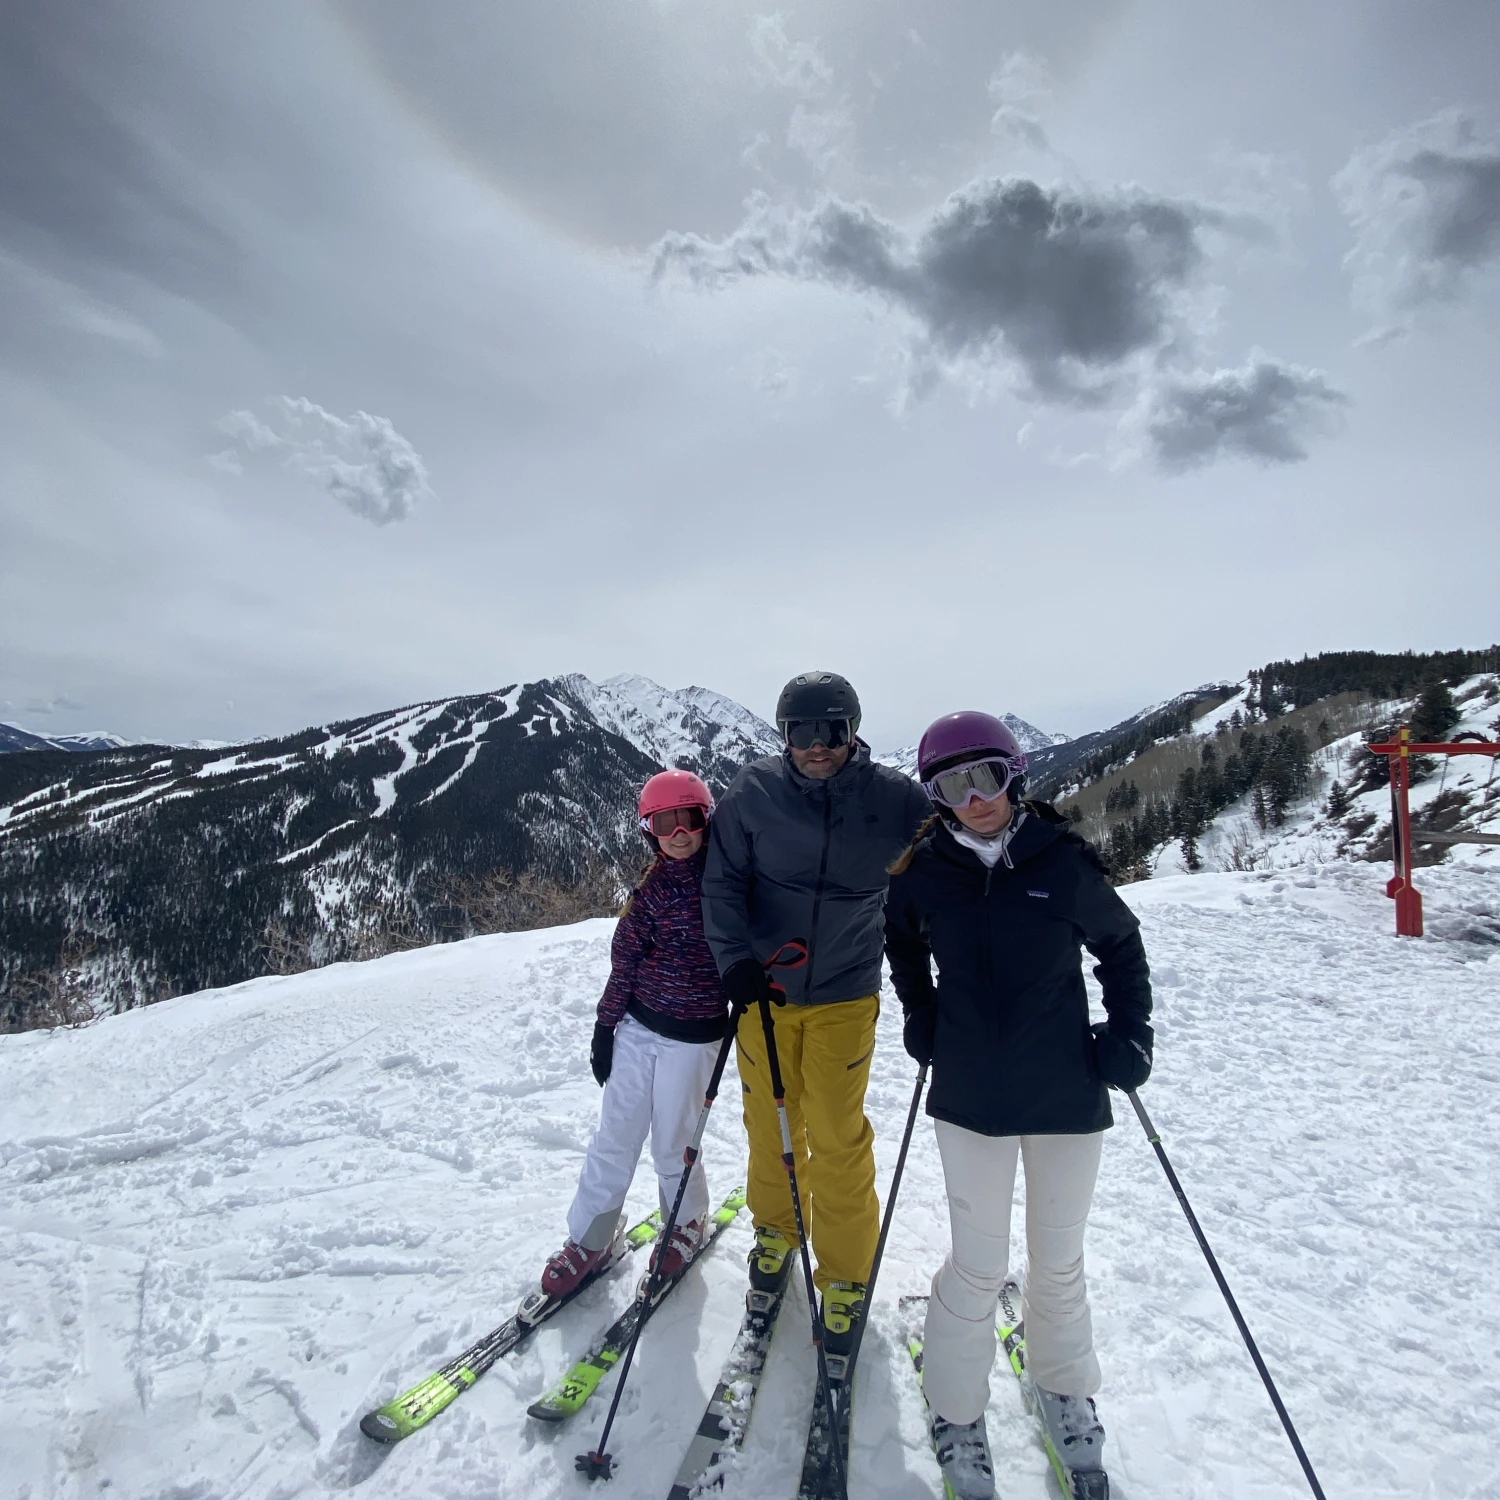 three people skiing in the snow with mountains in the background